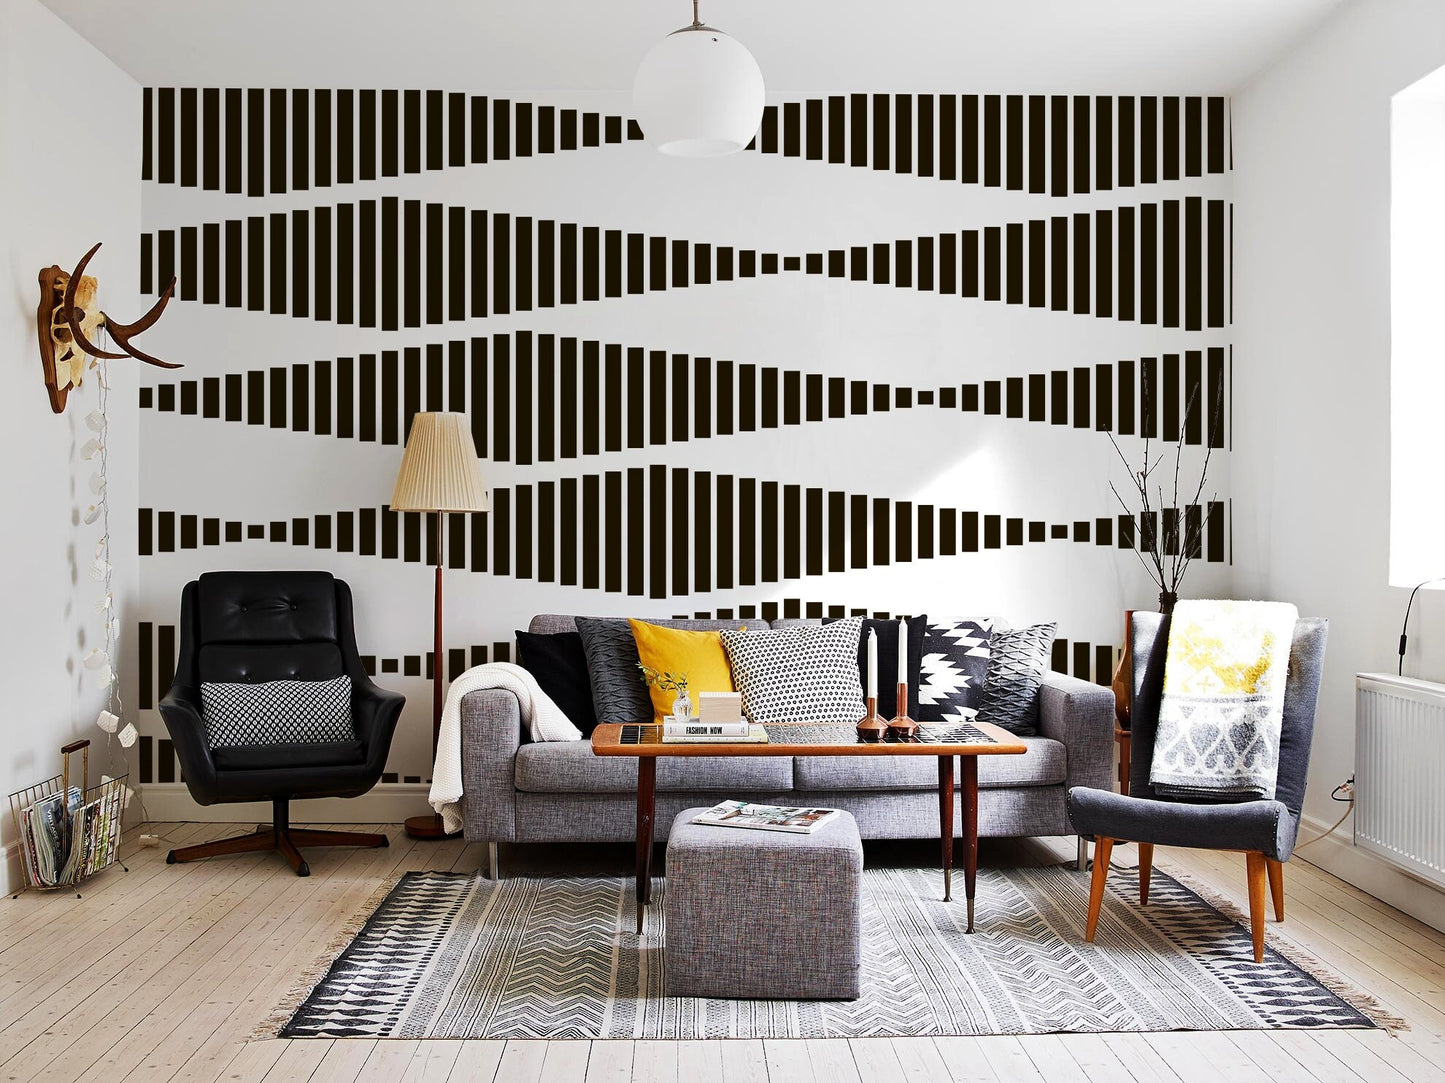 Black and White Geometric Removable Wallpaper Wallpaper Peel and Stick Wallpaper Wall Paper - B339